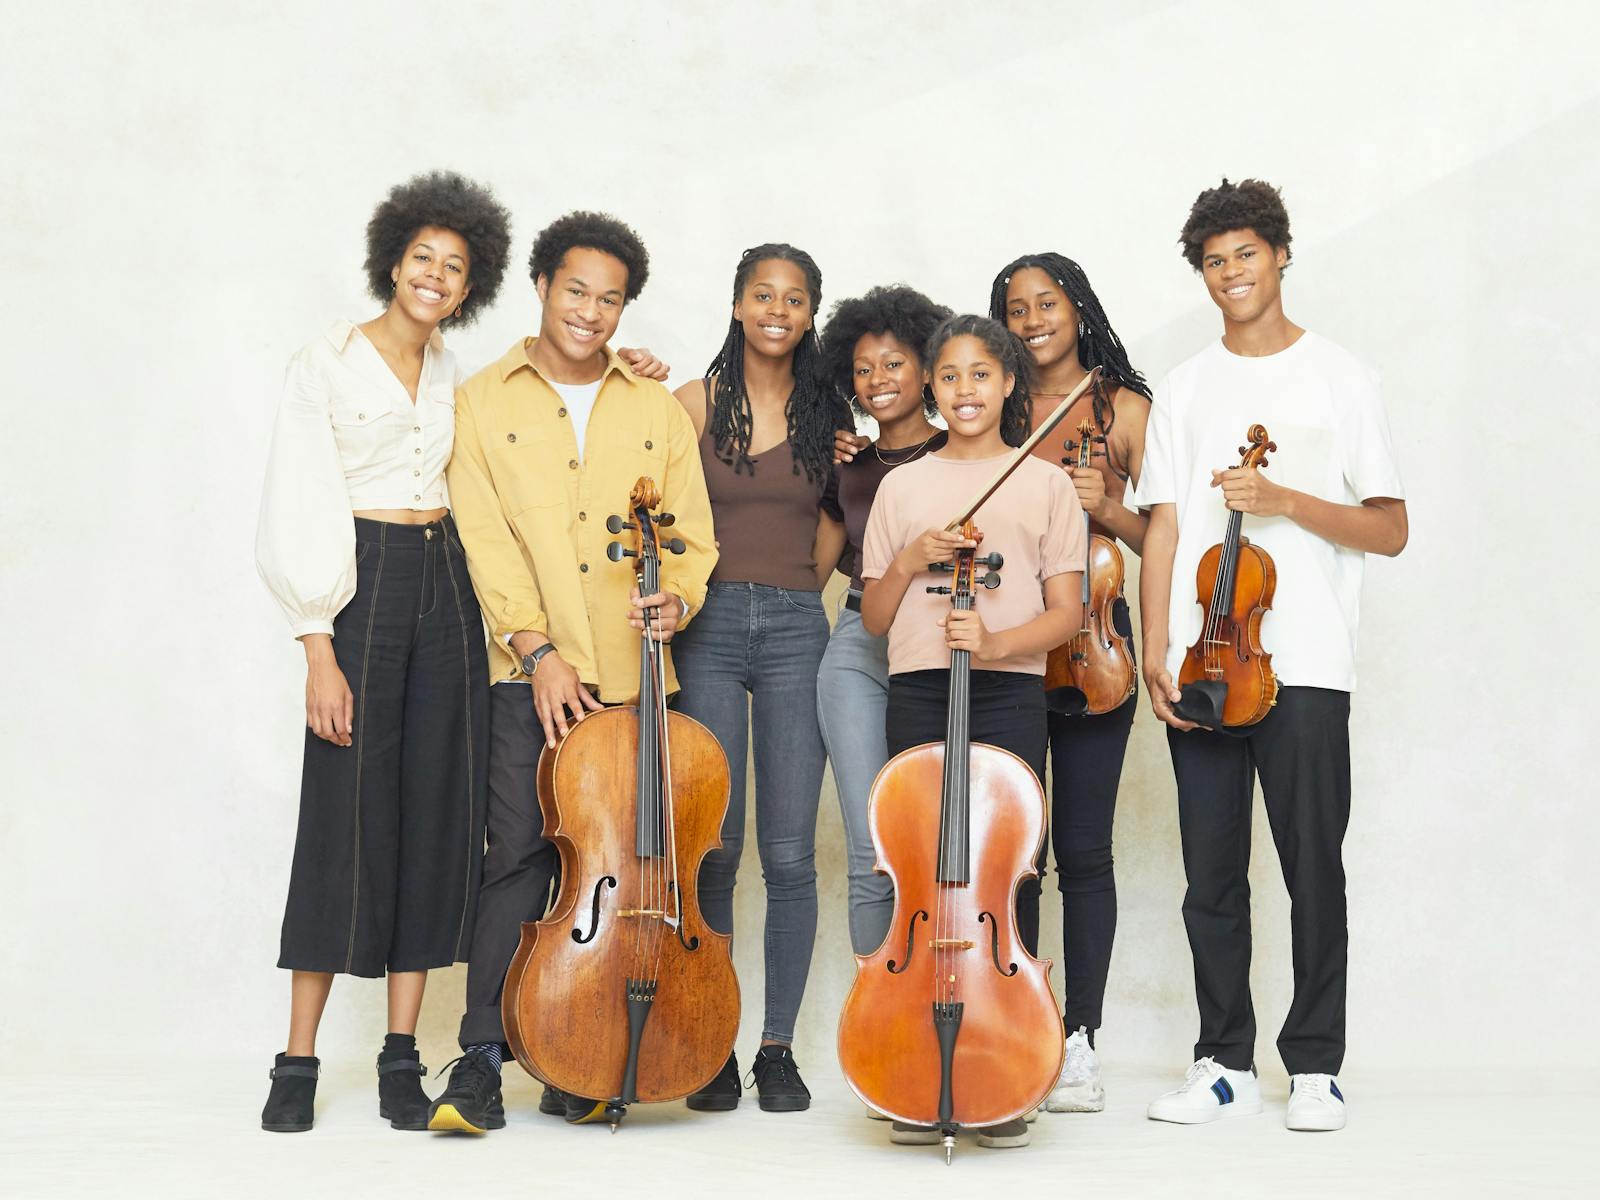 Image for Sheku Kanneh-Mason and the Kanneh-Mason Family - Melbourne